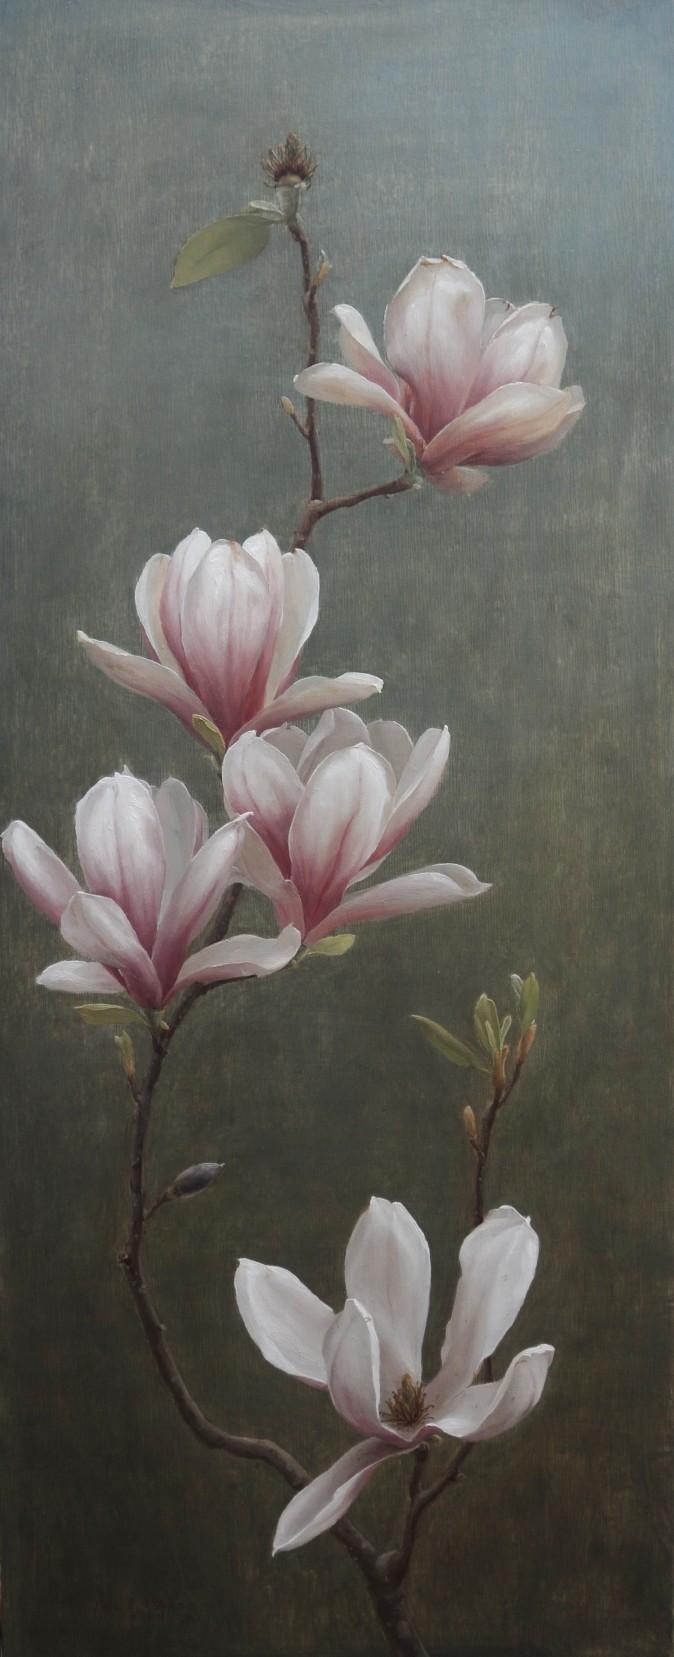 "Magnolia," 2017, by Katie G. Whipple. Oil on wood, 30 inches by 12 inches. (Courtesy of Katie G. Whipple)